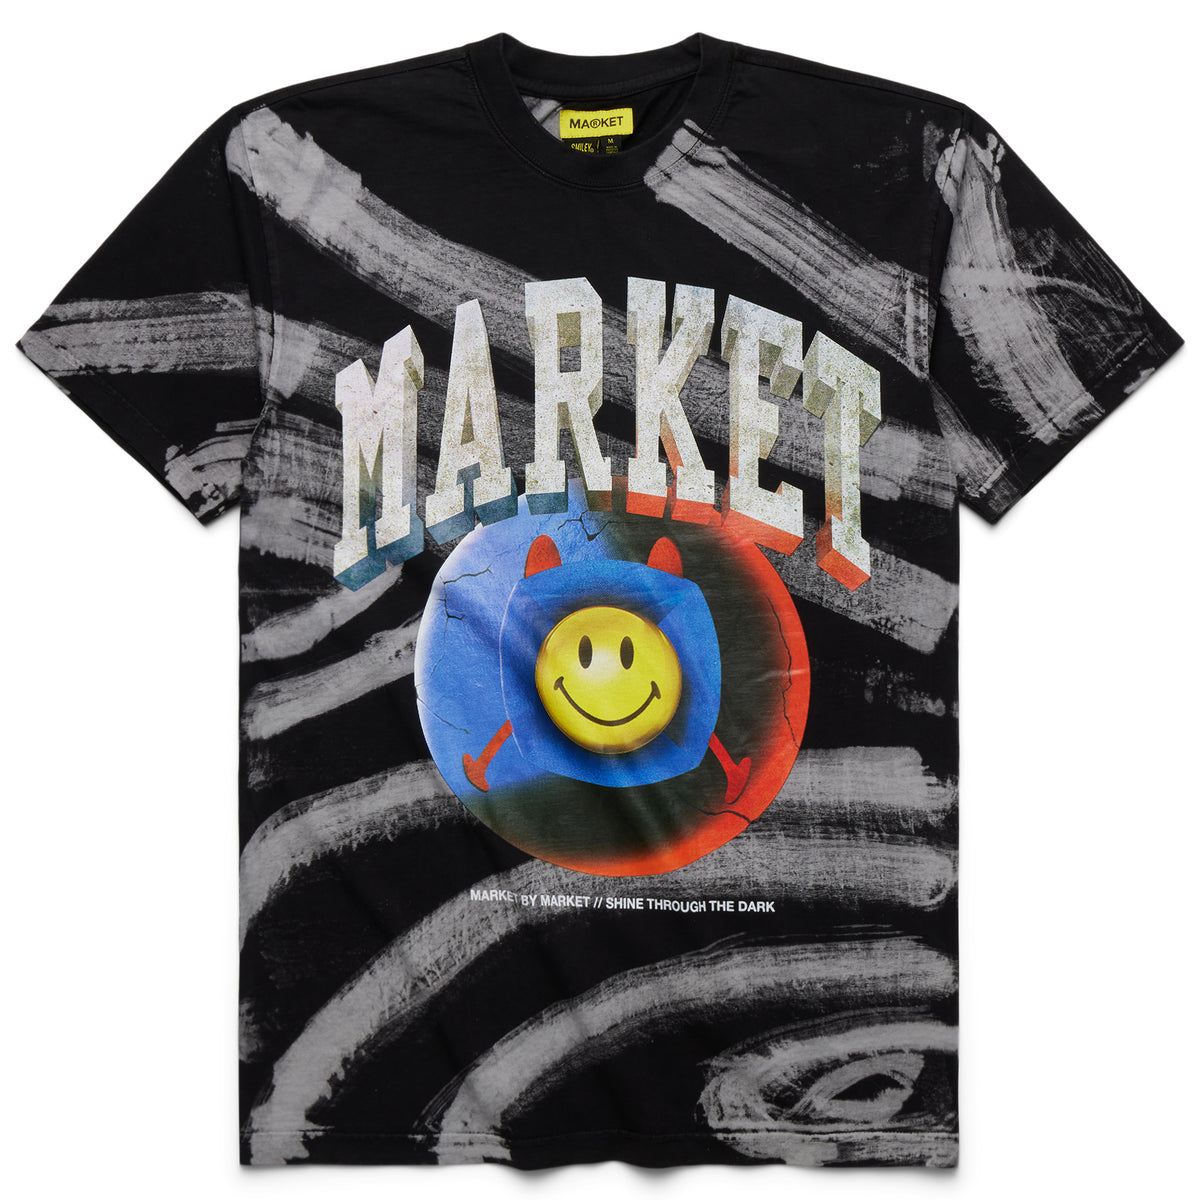 Market Smiley Happiness Within Tie Dye Tee "Black"